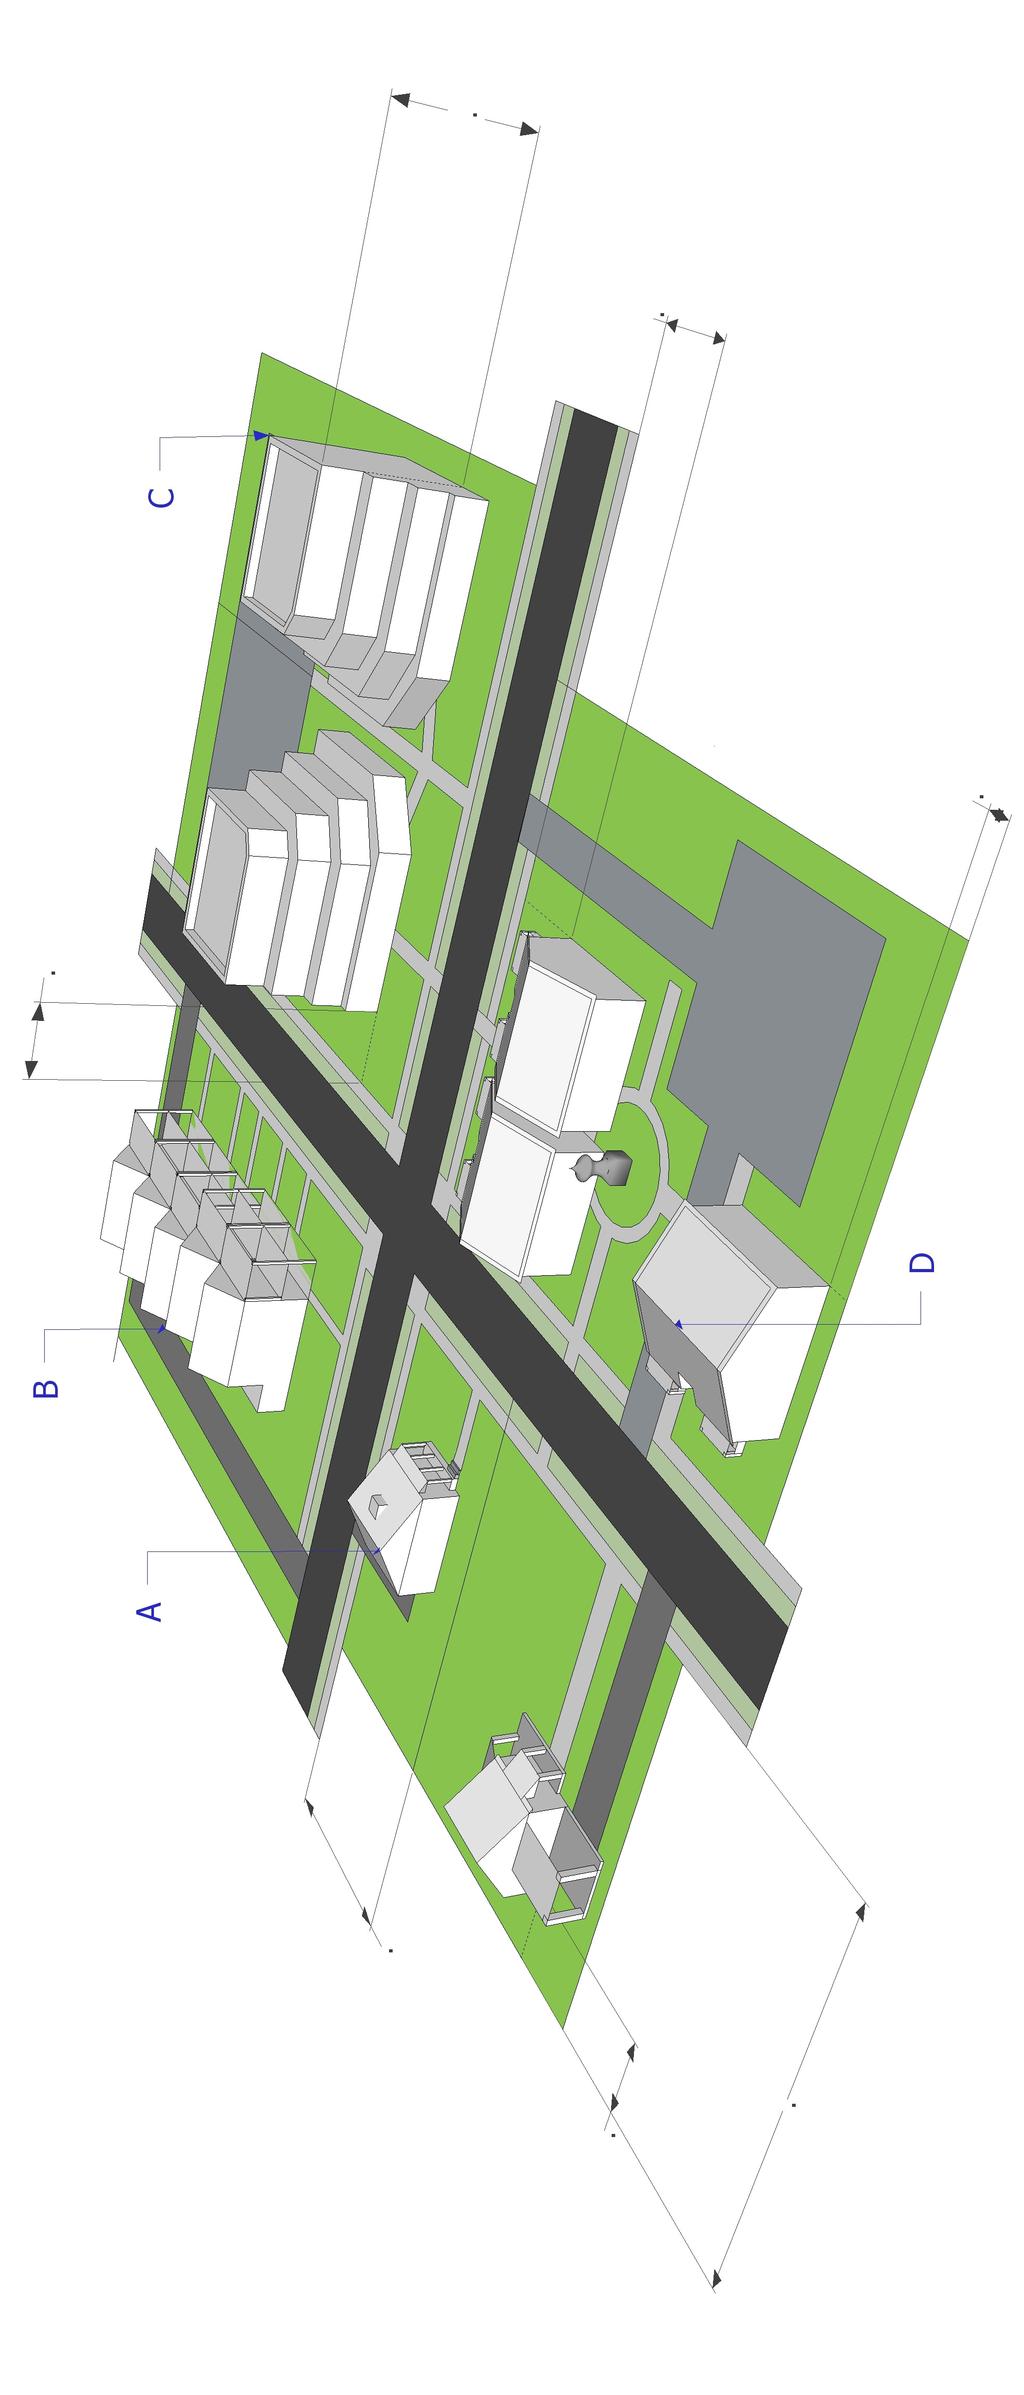 Section 23-3-2(I): RM-20: Medium-Density Multifamily Residential District Figure 23-3-2(I)(3): RM-20 Example Lot Configuration Representative Building Types A: Single-Family Detached Dwellings B: